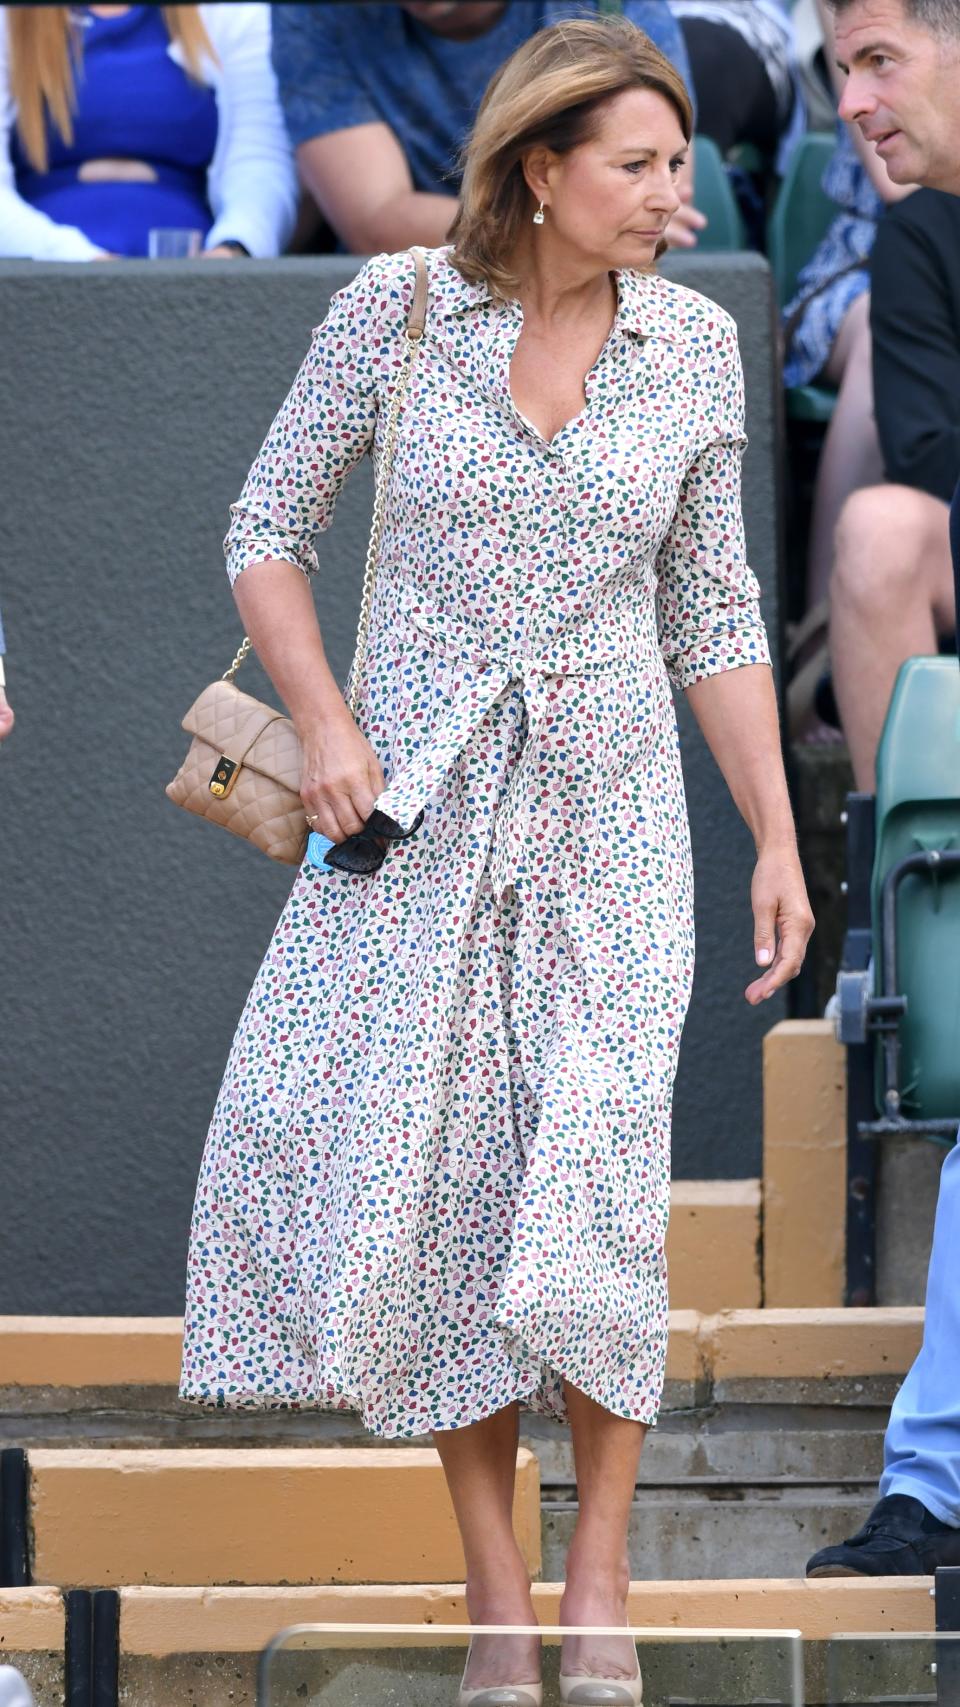 Carole Middleton attends day nine of the Wimbledon Tennis Championships